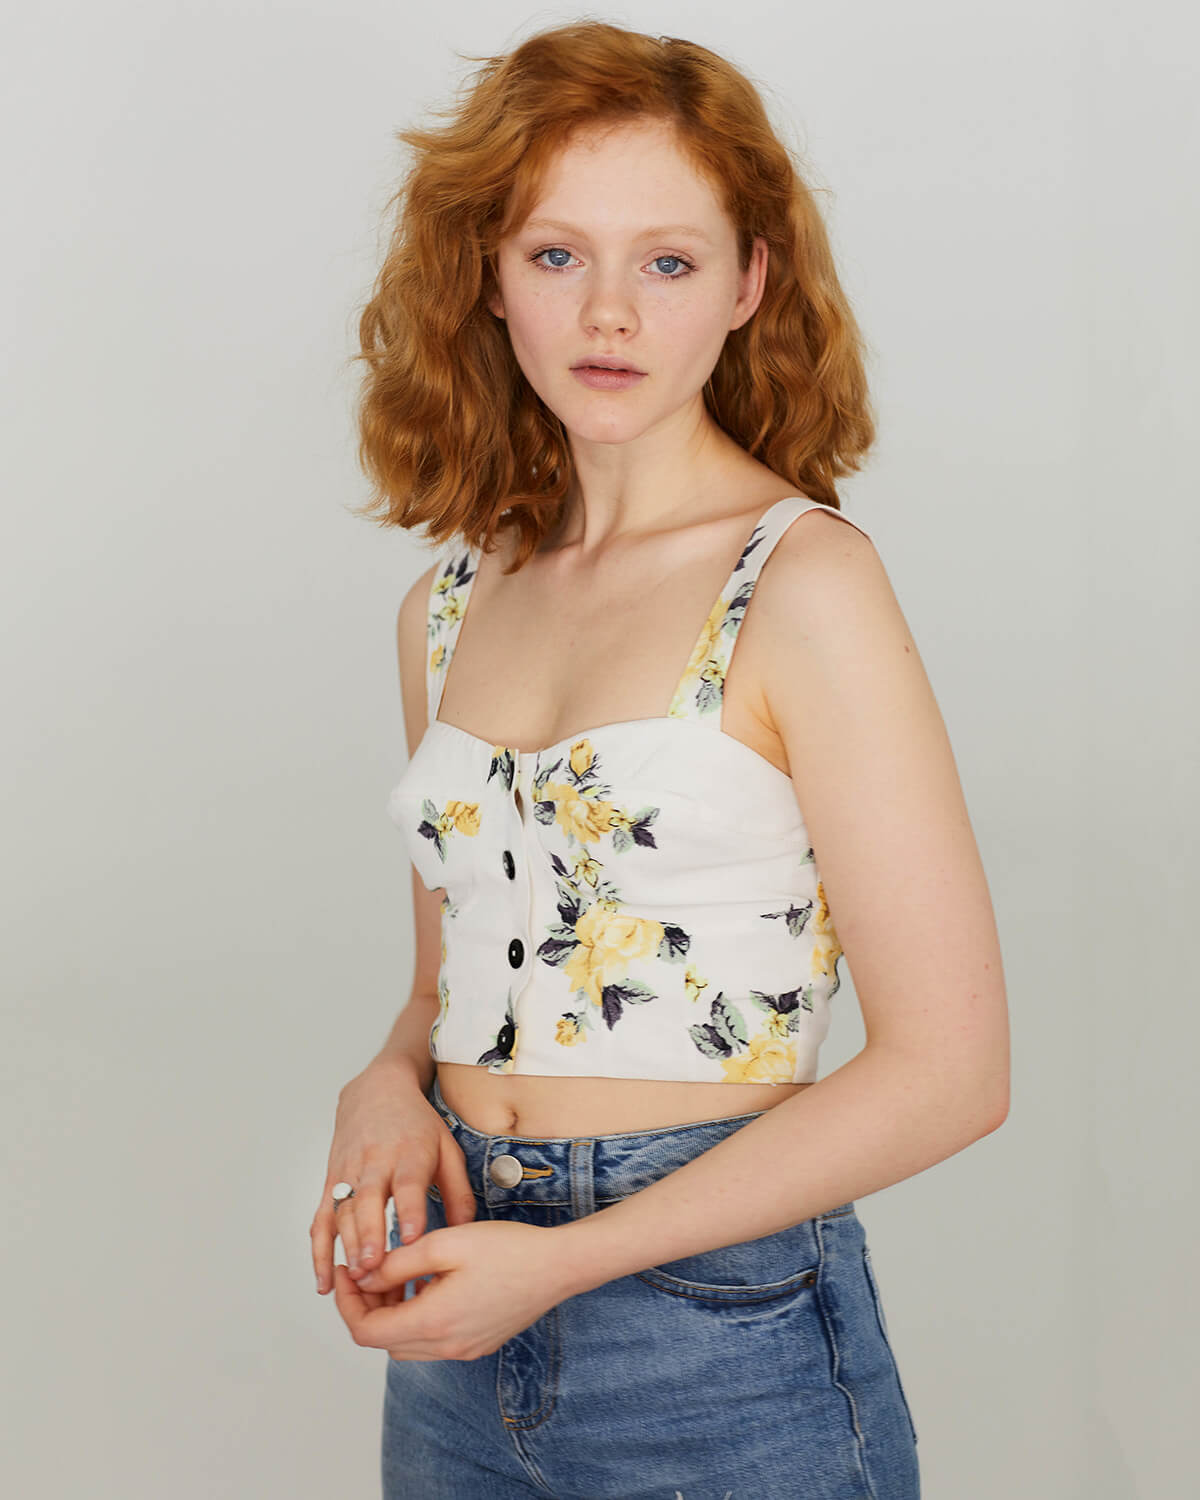 Image of red-haired model standing in jeans and crop top in front of plain background